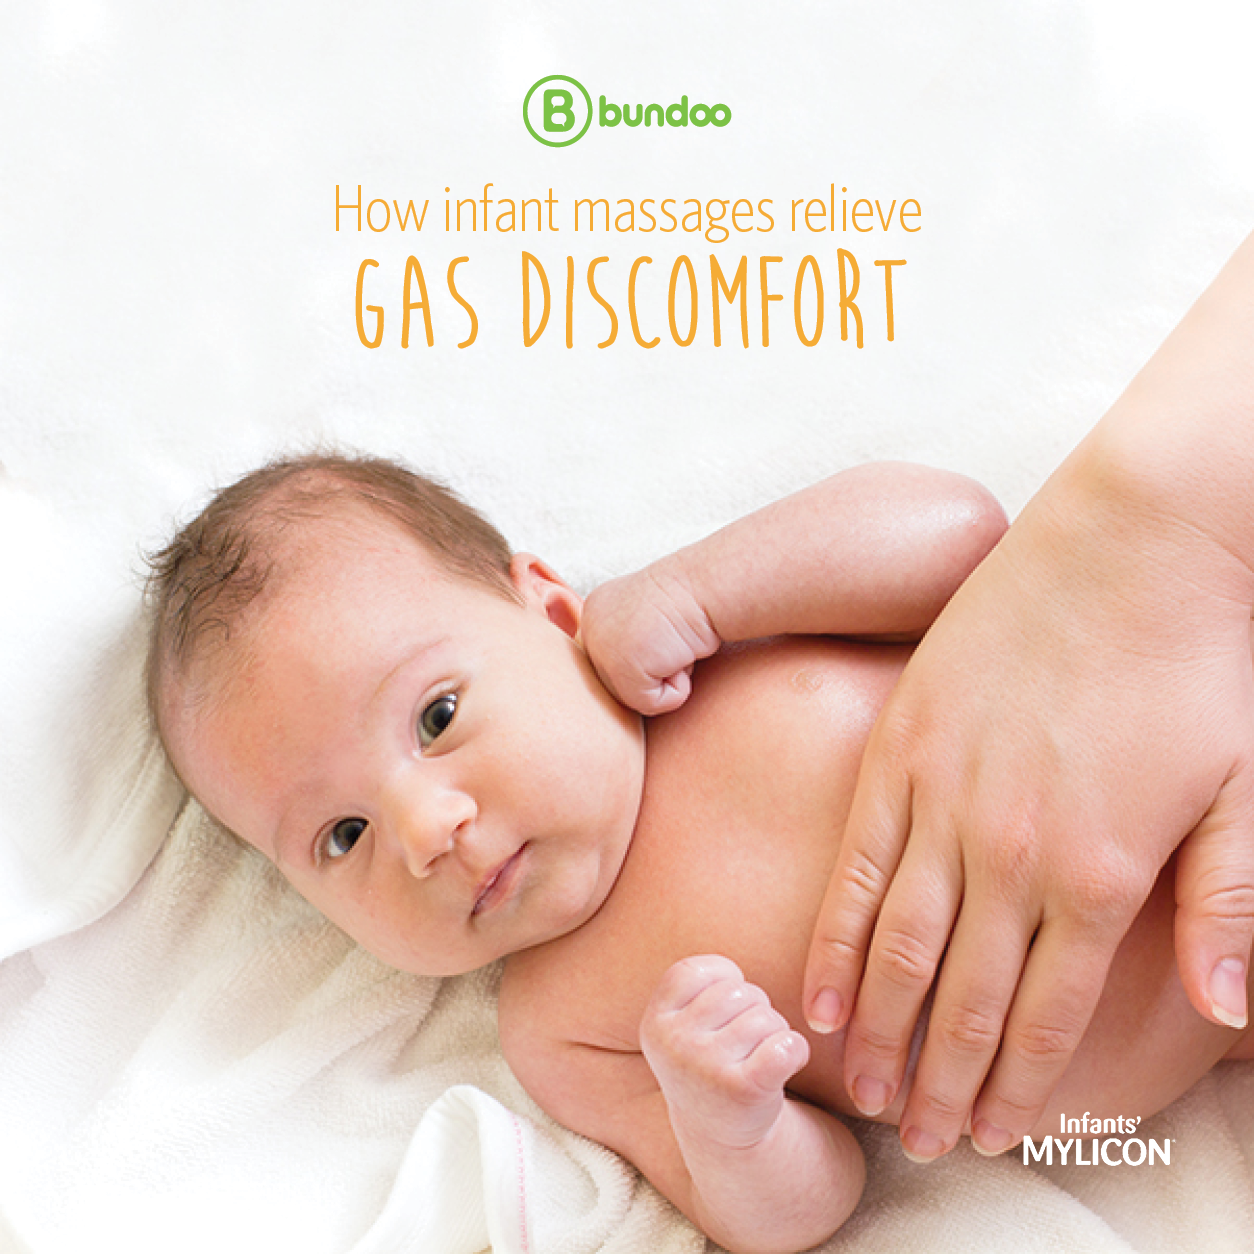 Infant massages can help a gassy baby